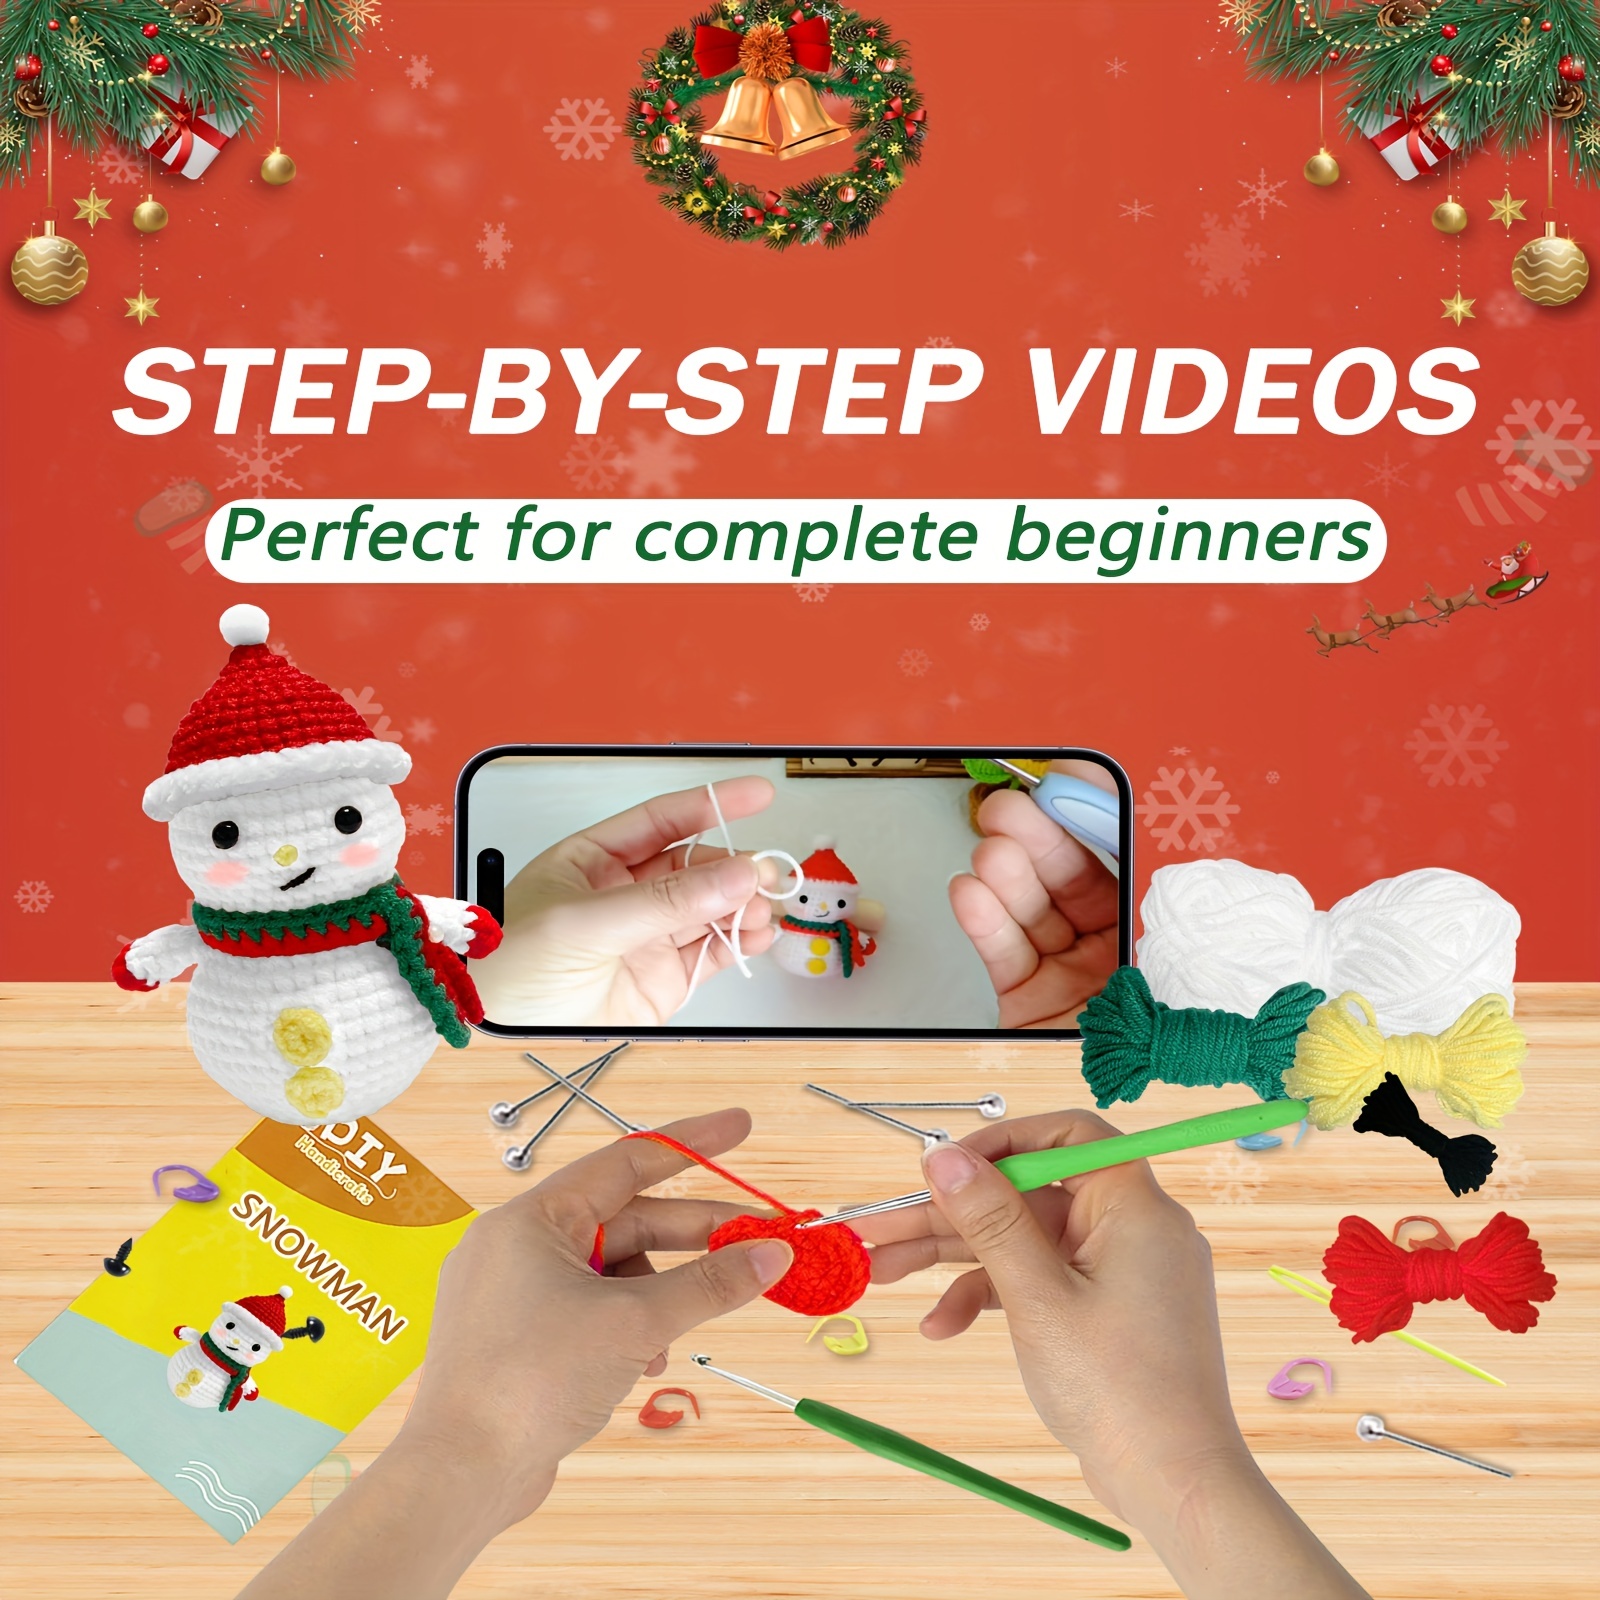 Christmas Santa Claus, Gingerbread Man, Bunny Crochet Kit for Beginners, for Adults with Step-by-Step Video Tutorials, Create Your Own Festive